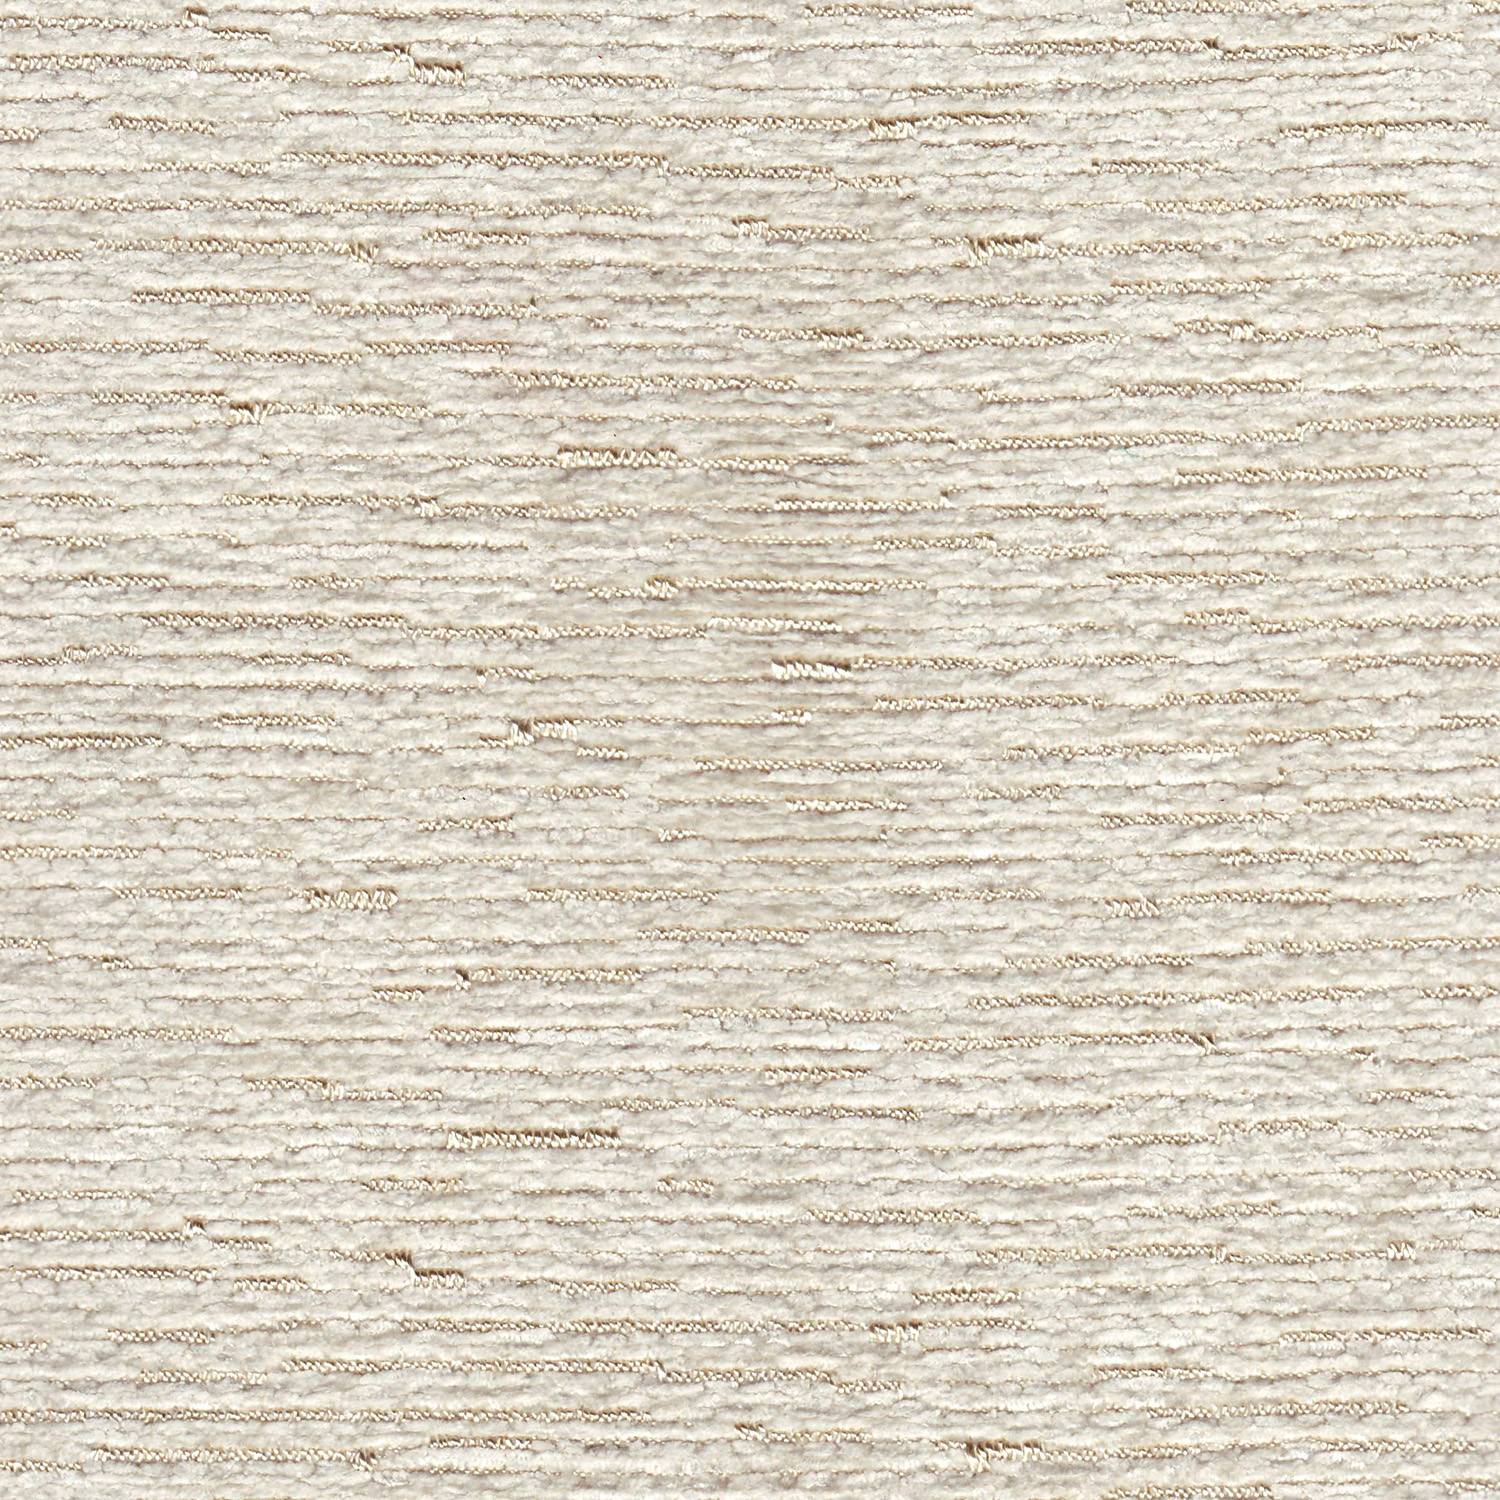 R-VIMA/IVORY - Upholstery Only Fabric Suitable For Upholstery And Pillows Only.   - Spring